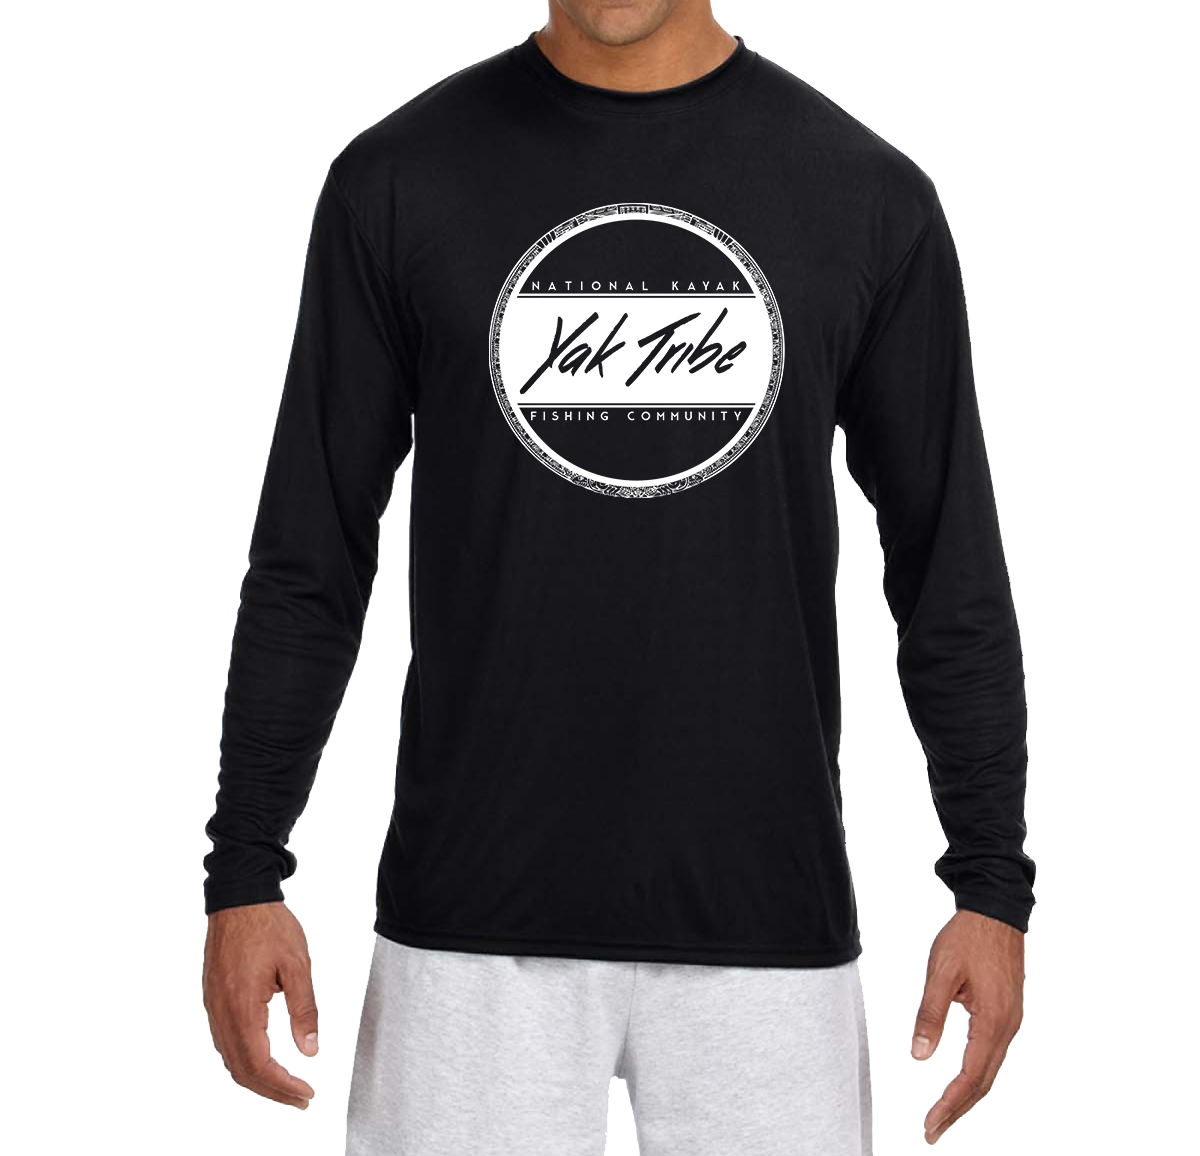 https://www.yak-tribe.com/wp-content/uploads/White-Seal-Long-Sleeve-Black.png